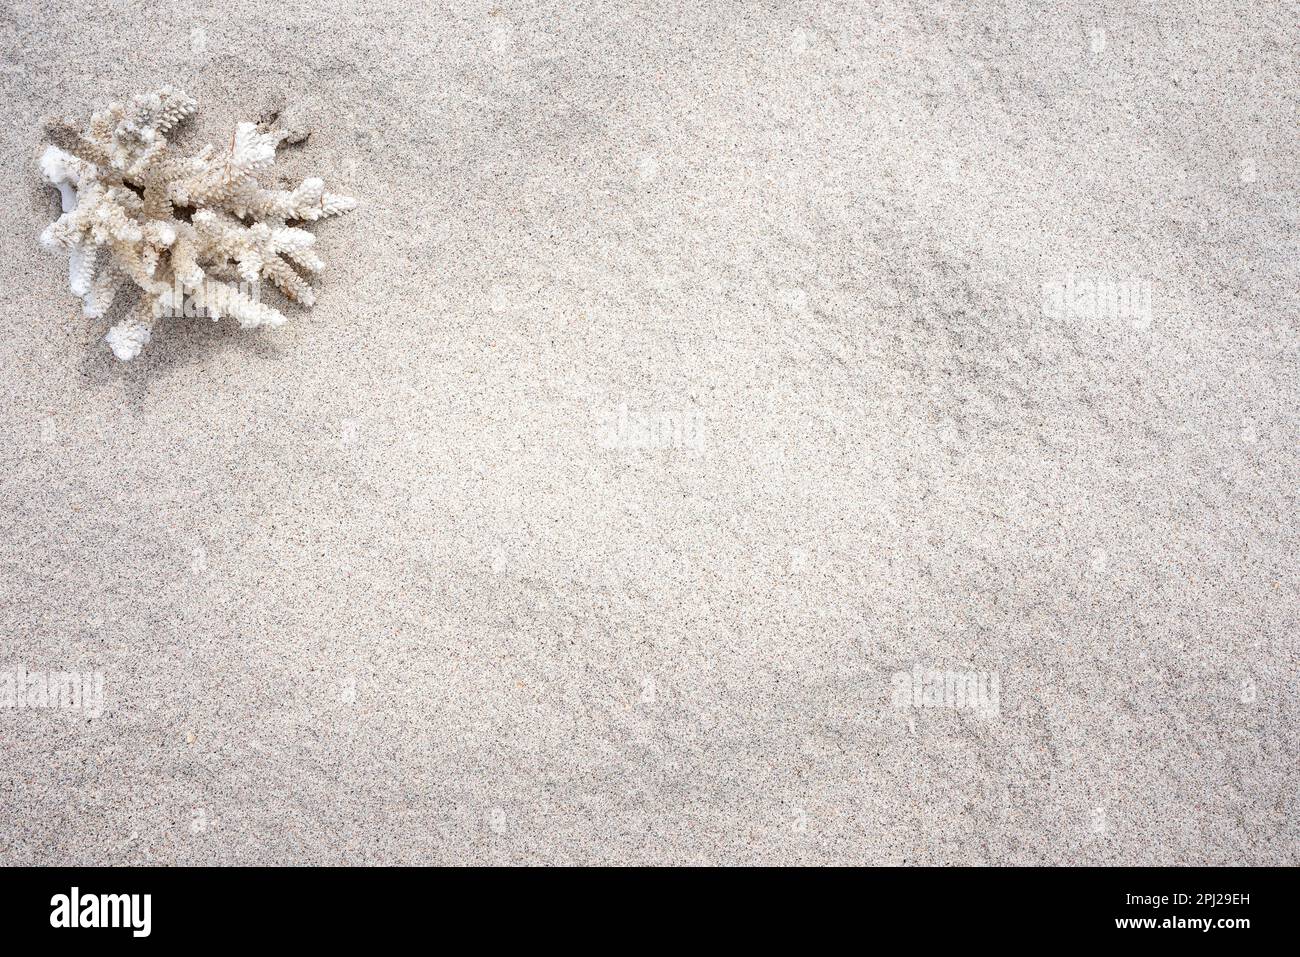 Table top motif of a beach with a coral in the upper left corner as a decorative element. Fine sand texture. Stock Photo